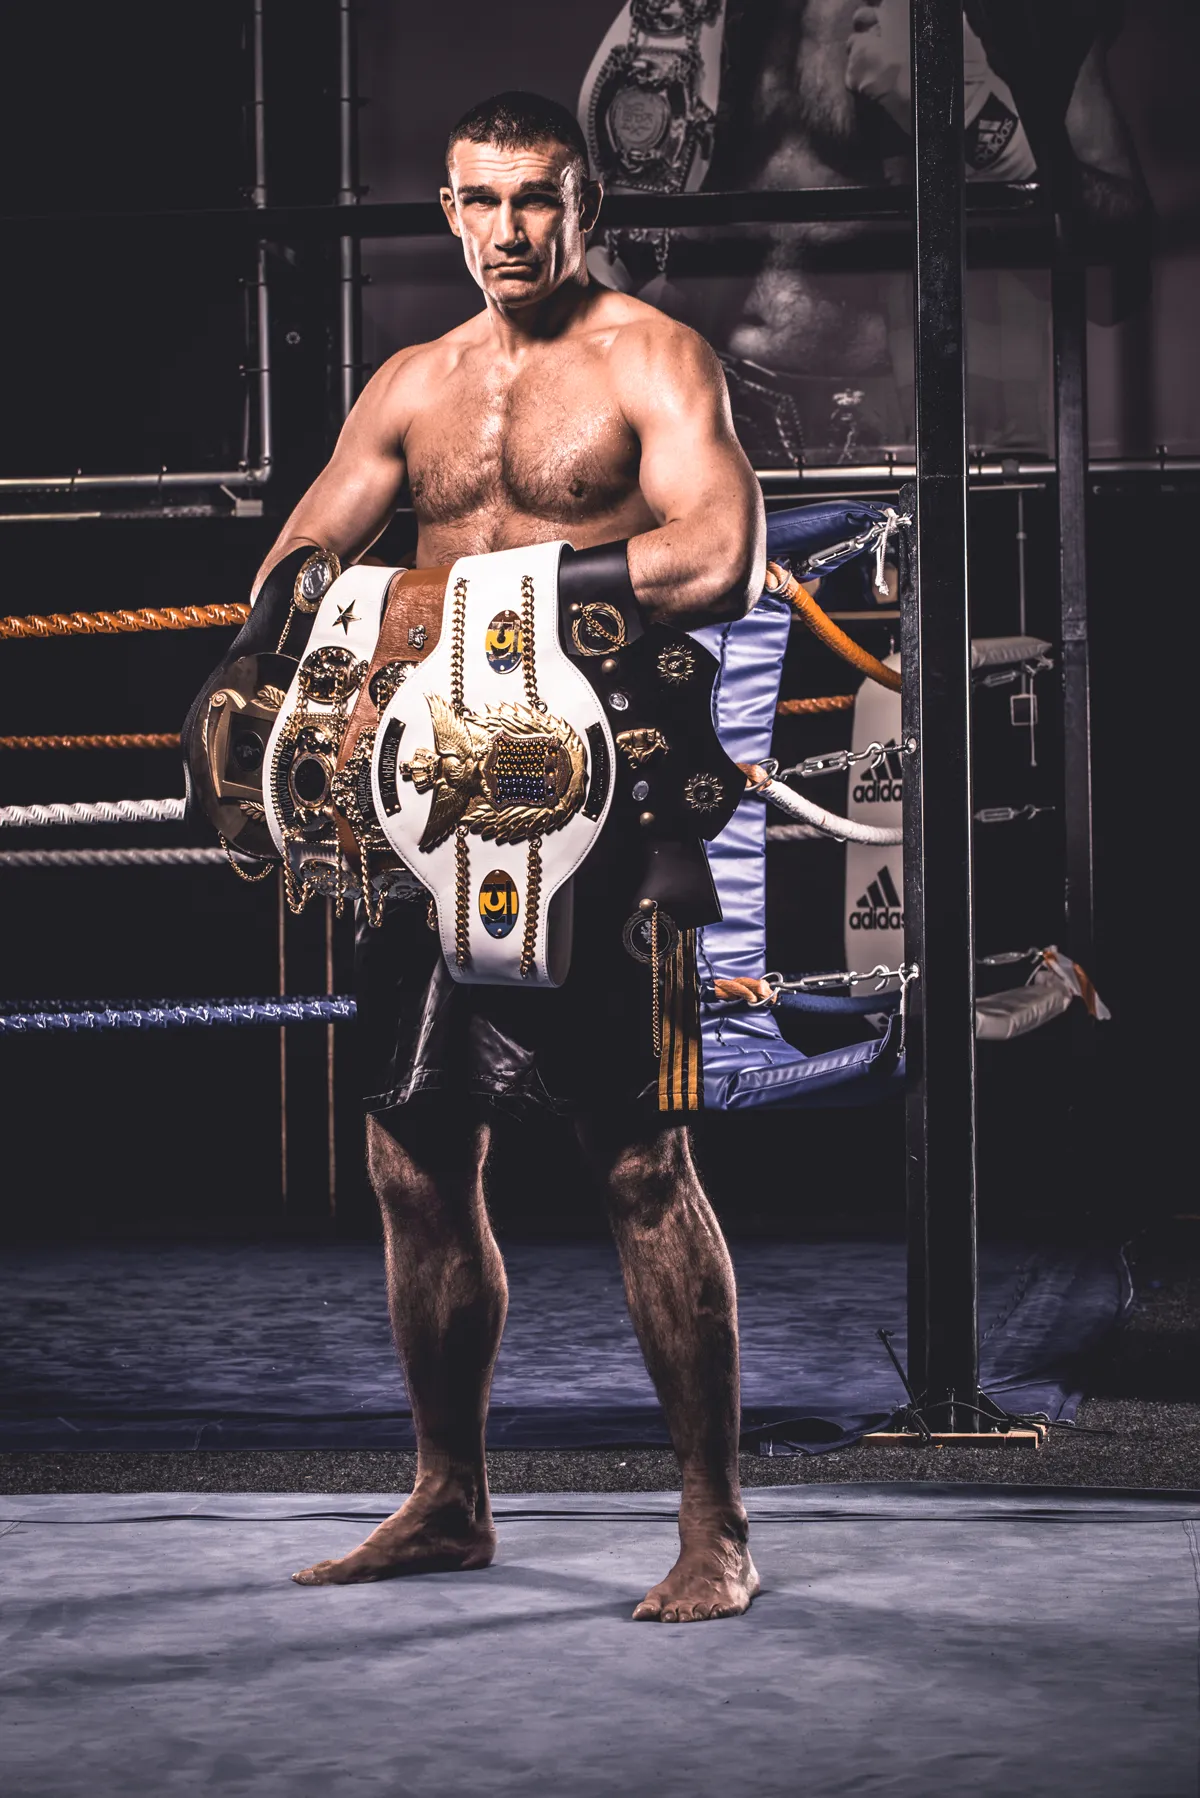 LEGEND by PETER AERTS